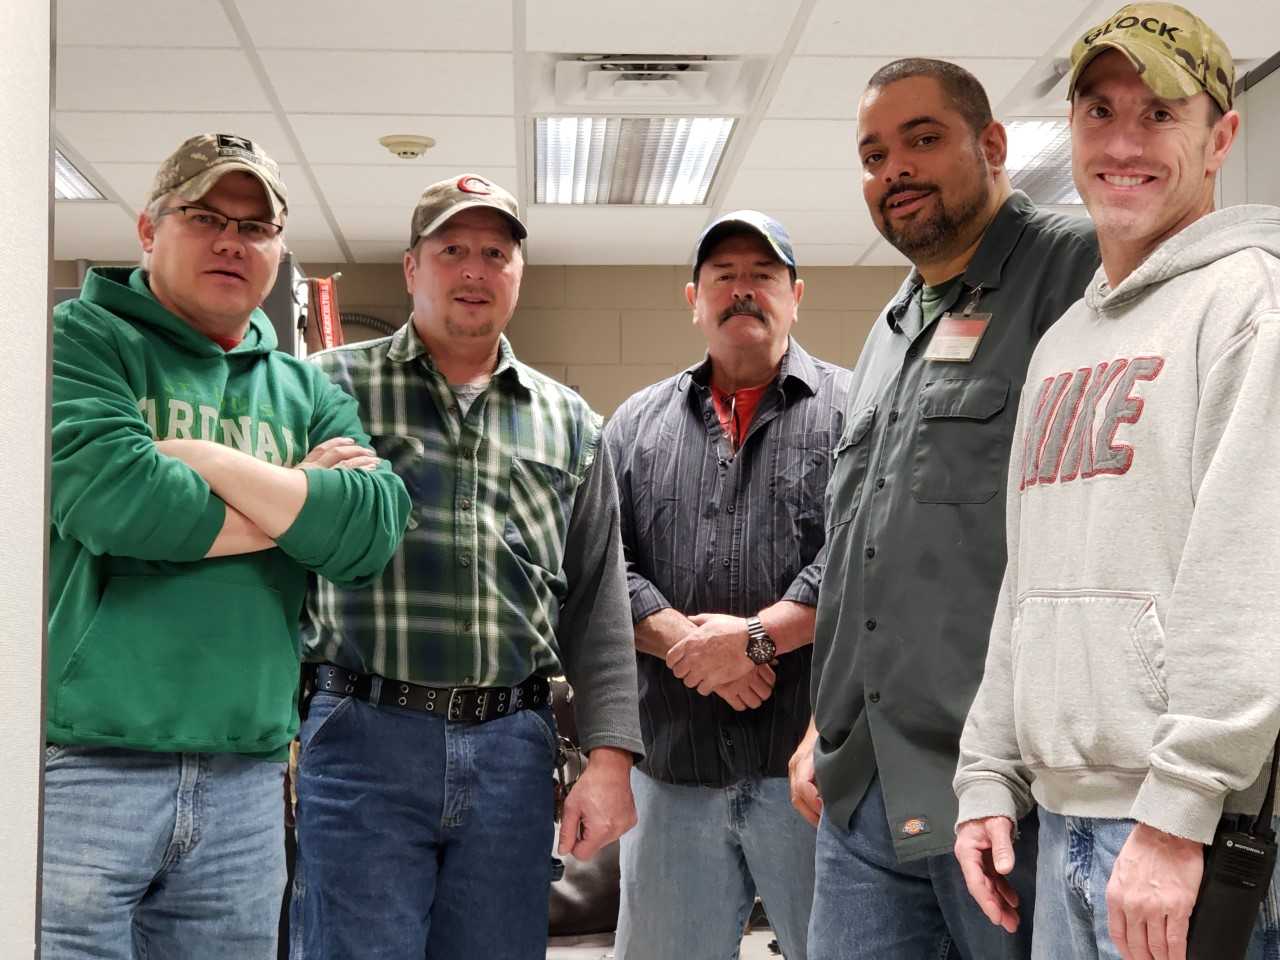 Left to Right: Andy Sylvester, Scott Crowell, Larry Maxhimer, Cesar Rolon and Bill Carey. Not in picture: John Fleming.